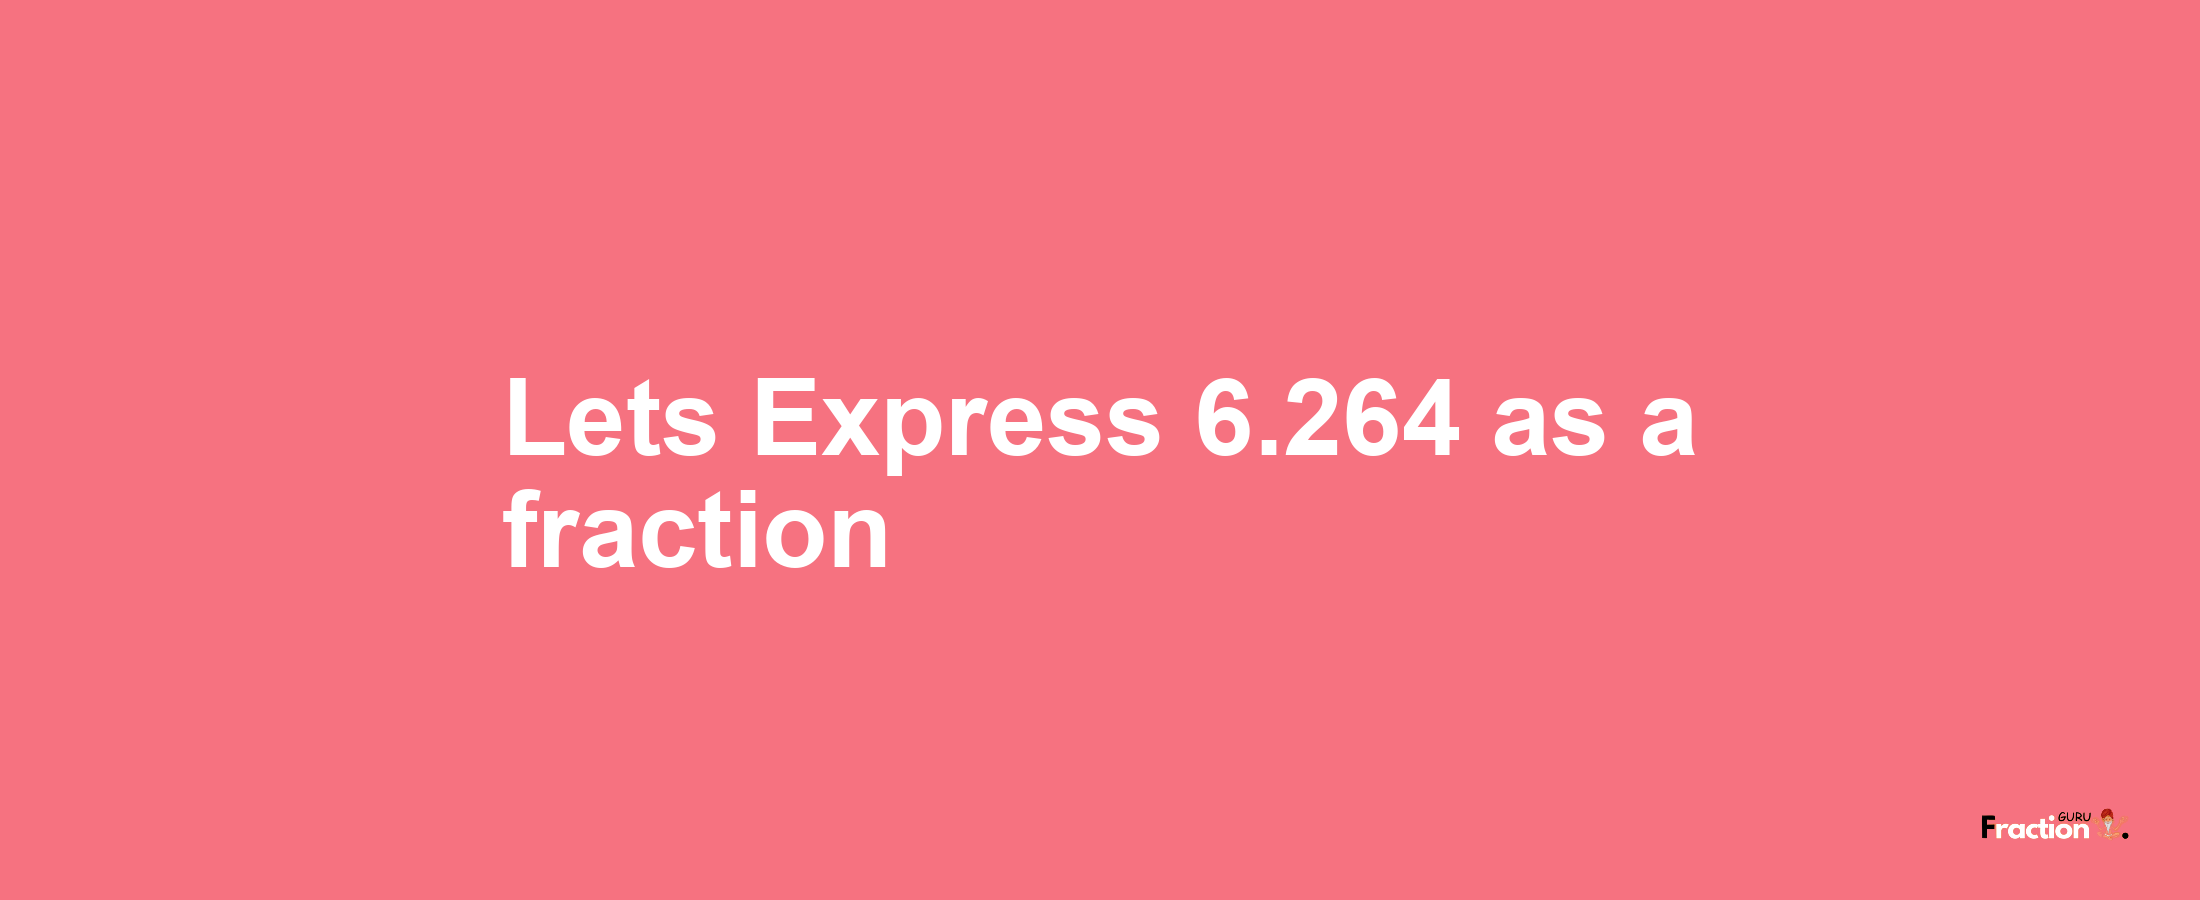 Lets Express 6.264 as afraction